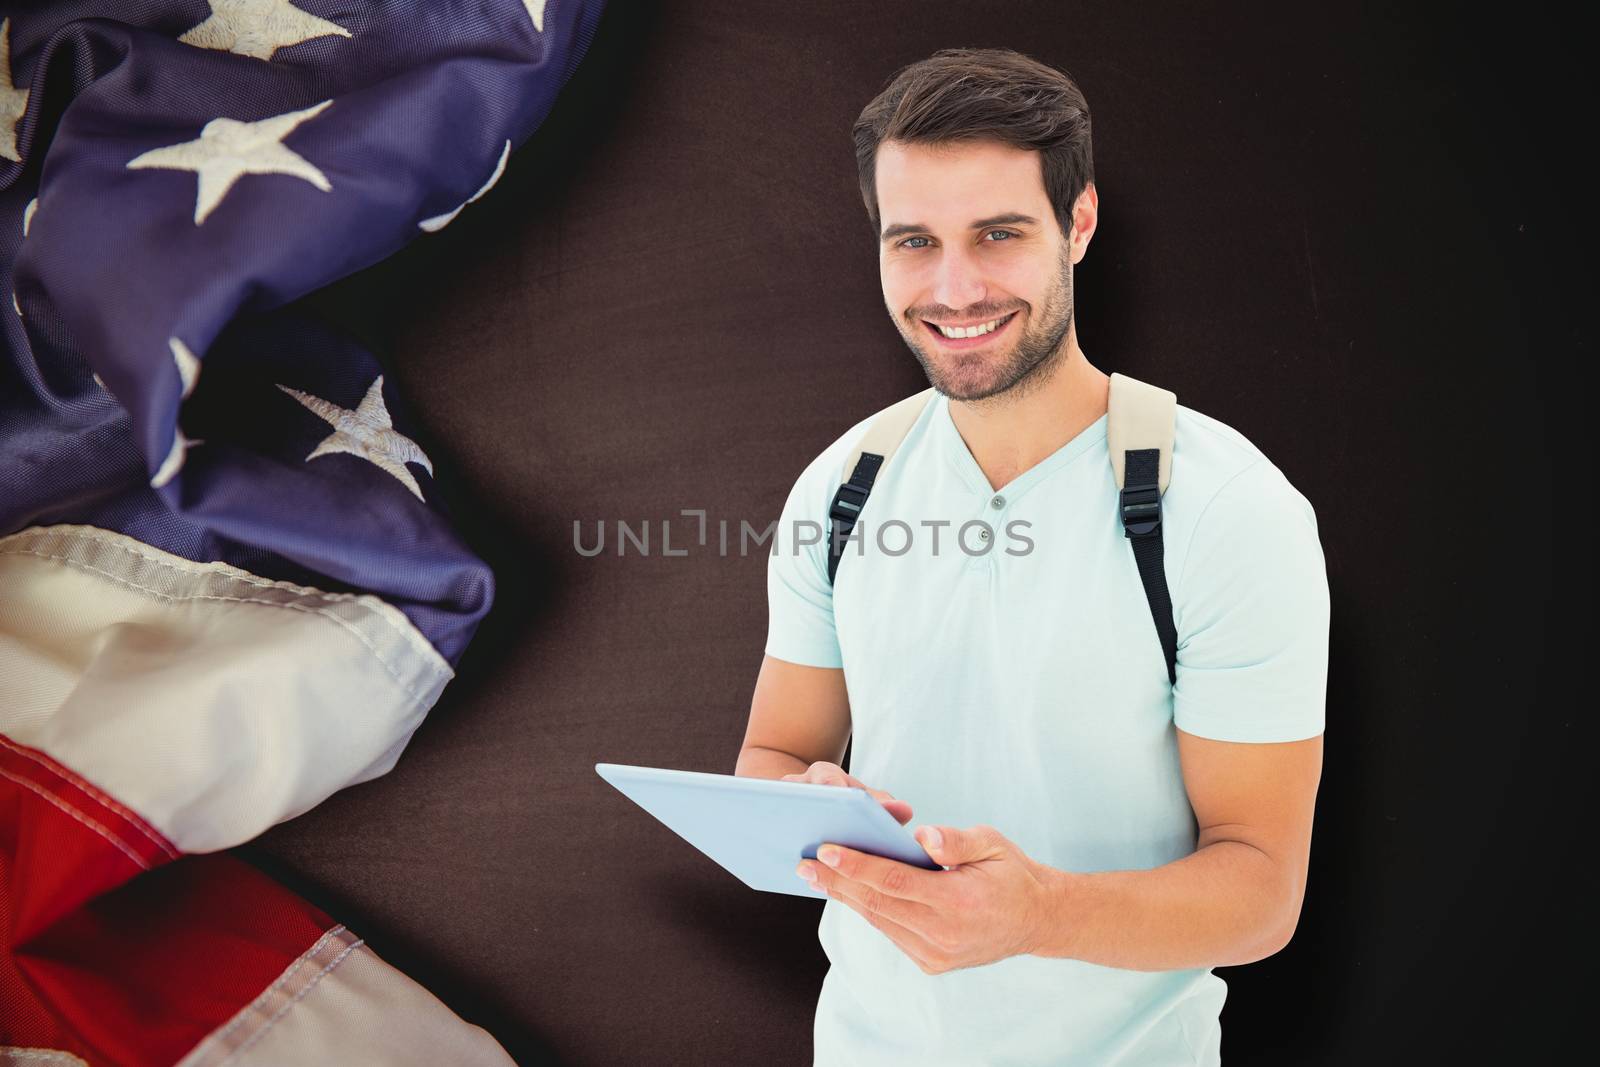 Student using tablet pc against american flag on chalkboard